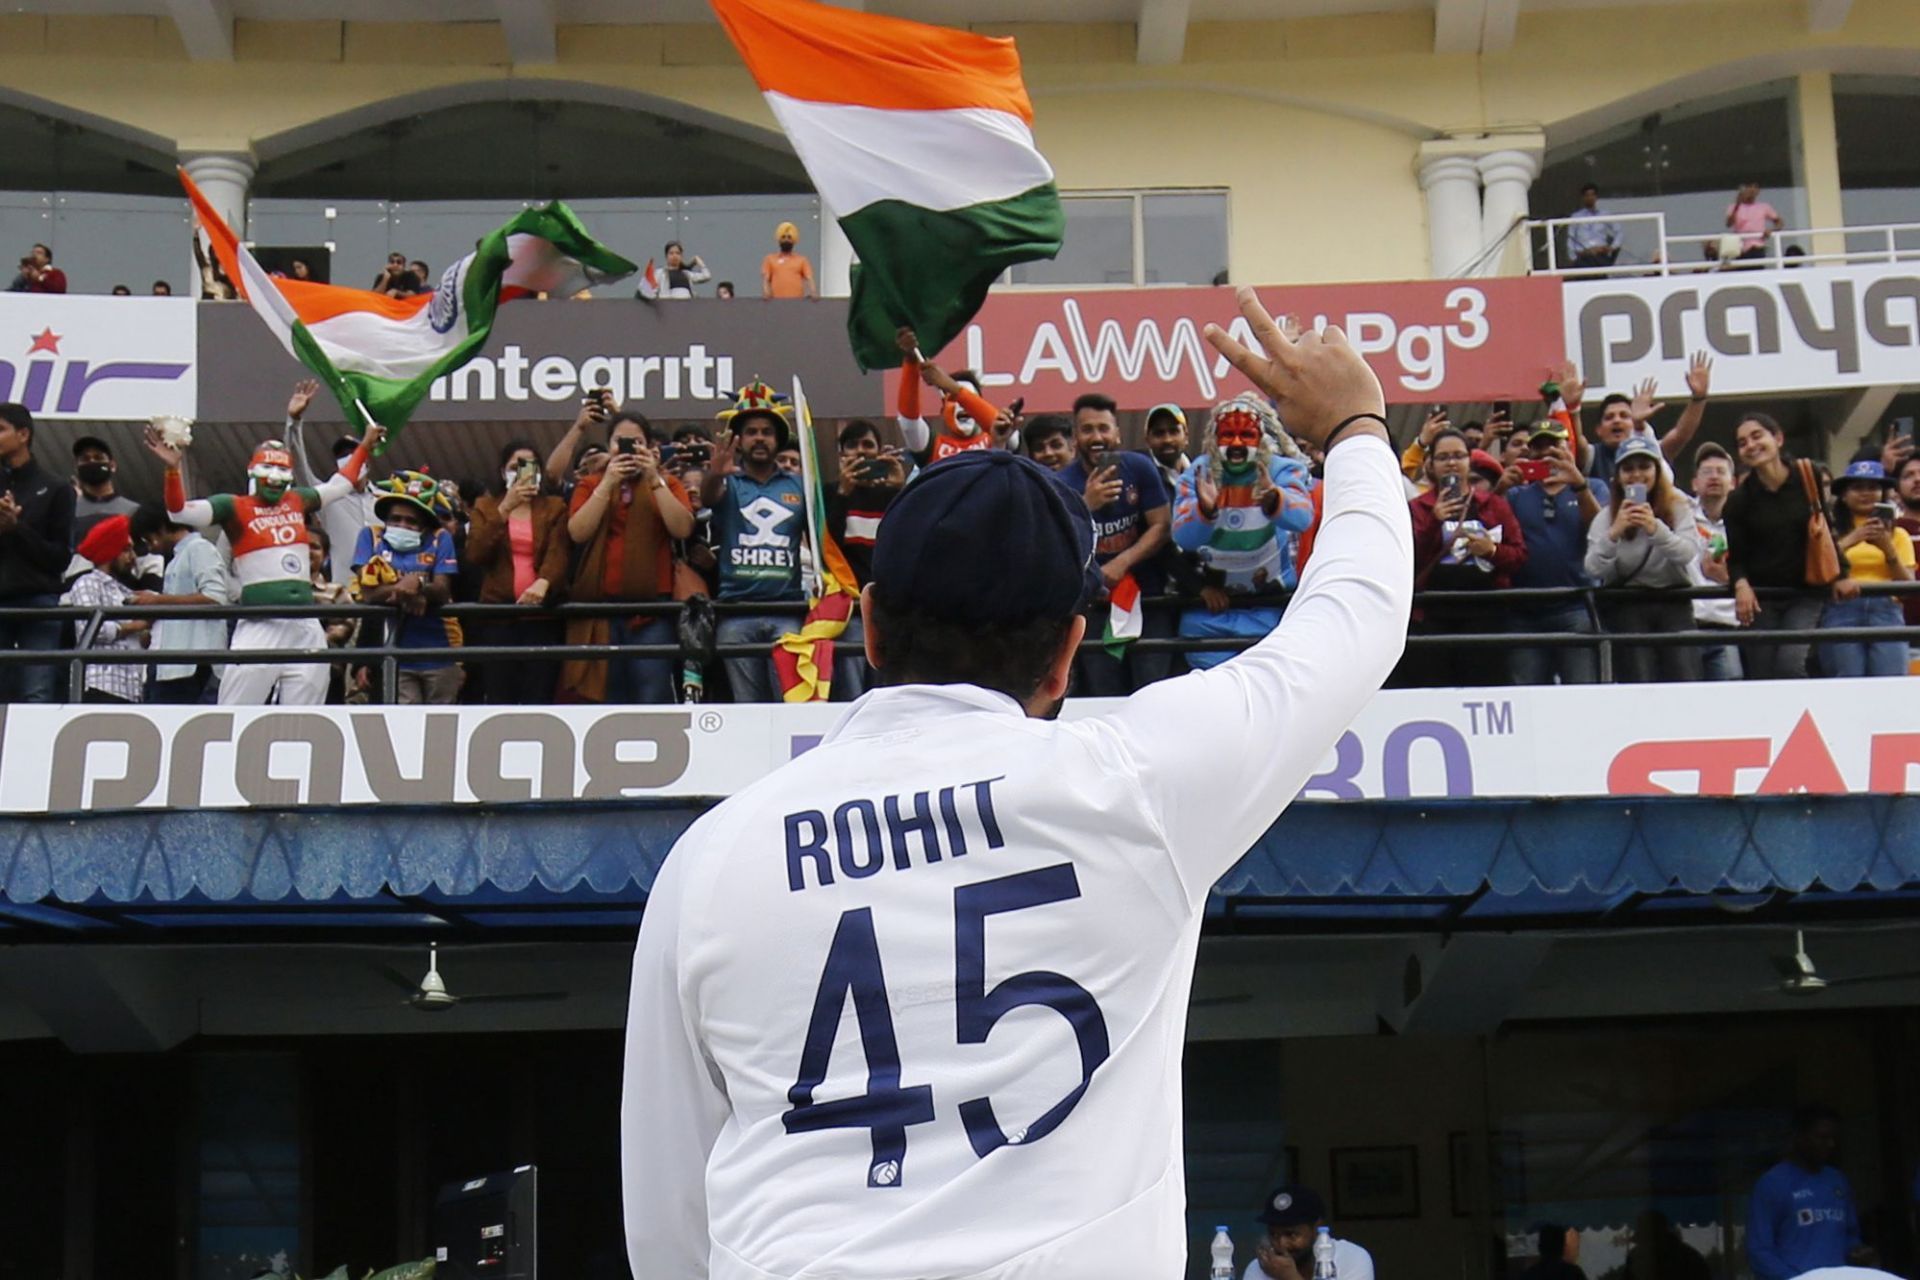 Rohit Sharma led the Indian Test team for the first time.